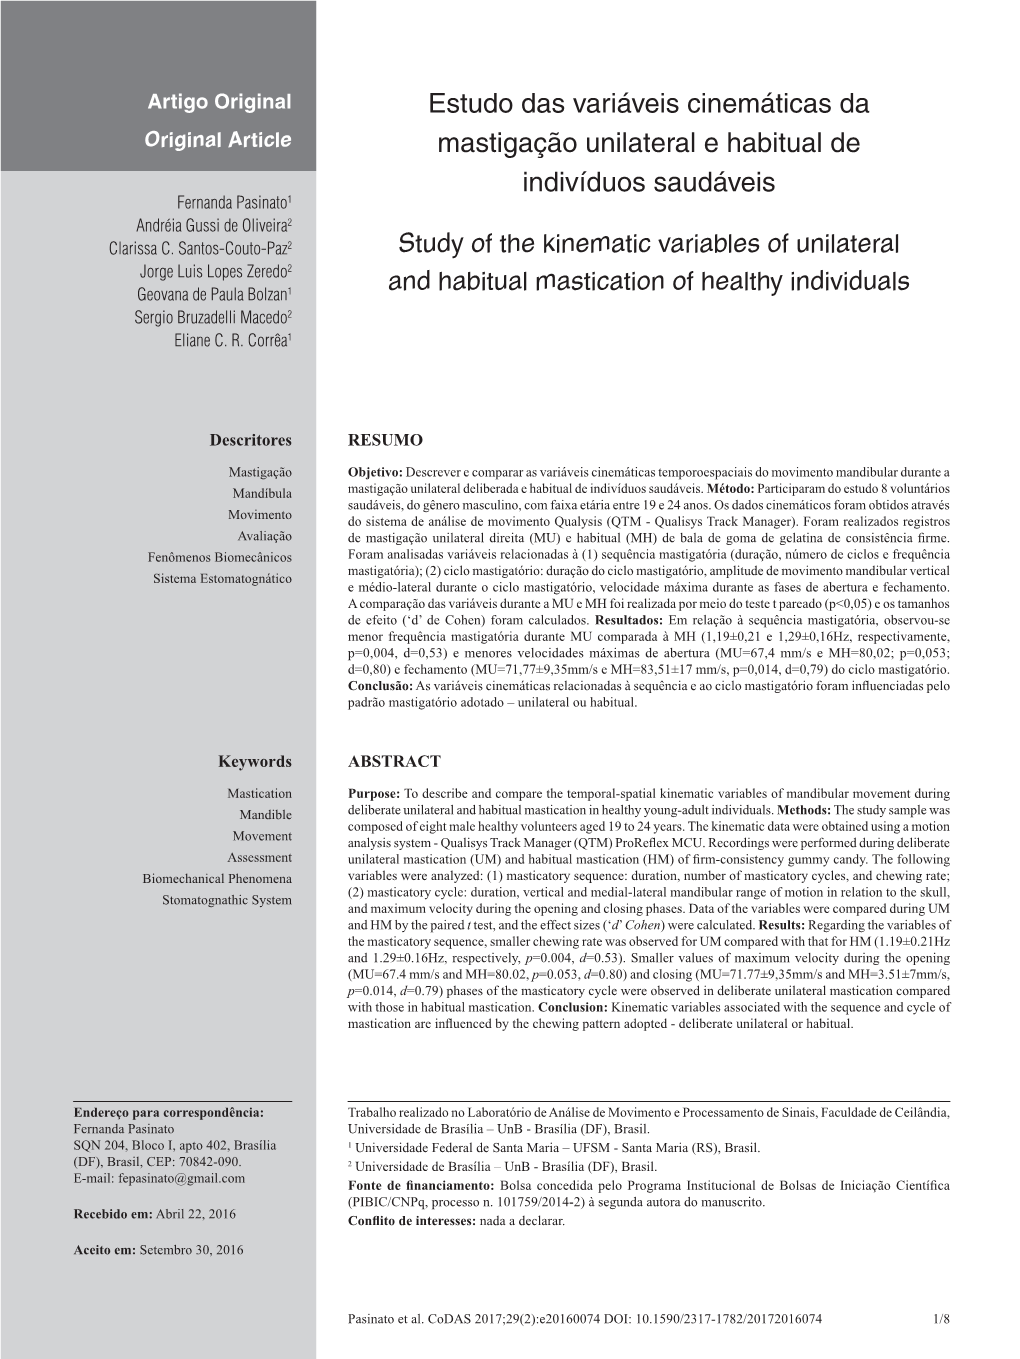 Study of the Kinematic Variables of Unilateral and Habitual Mastication of Healthy Individuals